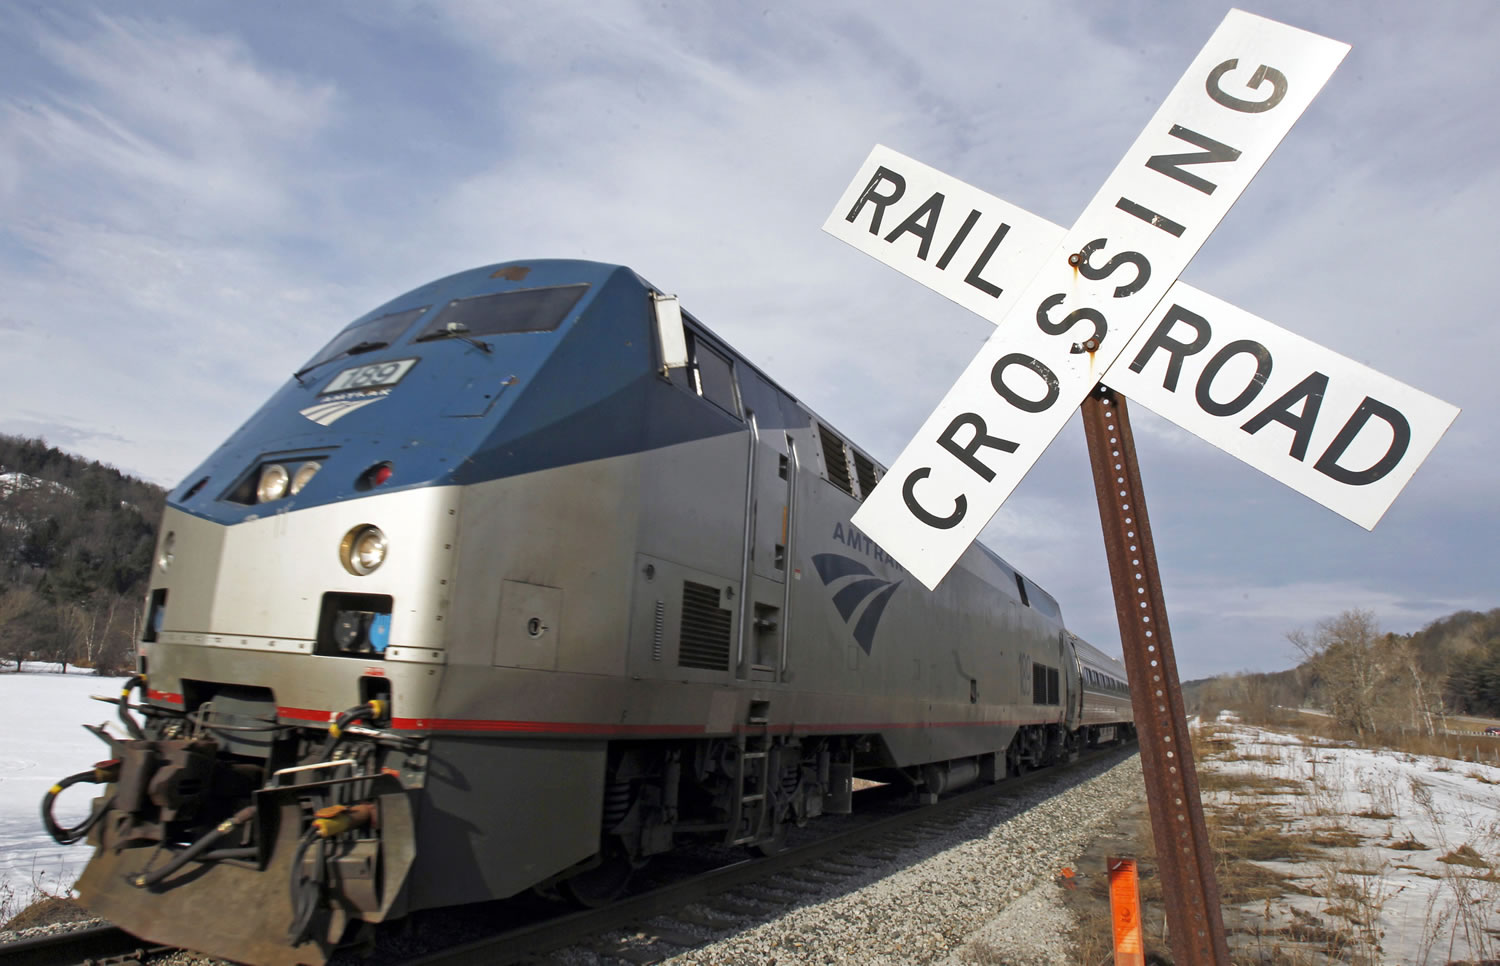 Amtrak says ridership has increased in the first six months of fiscal year 2013, with ridership in March setting a record as the single best month ever in Amtrak's history.